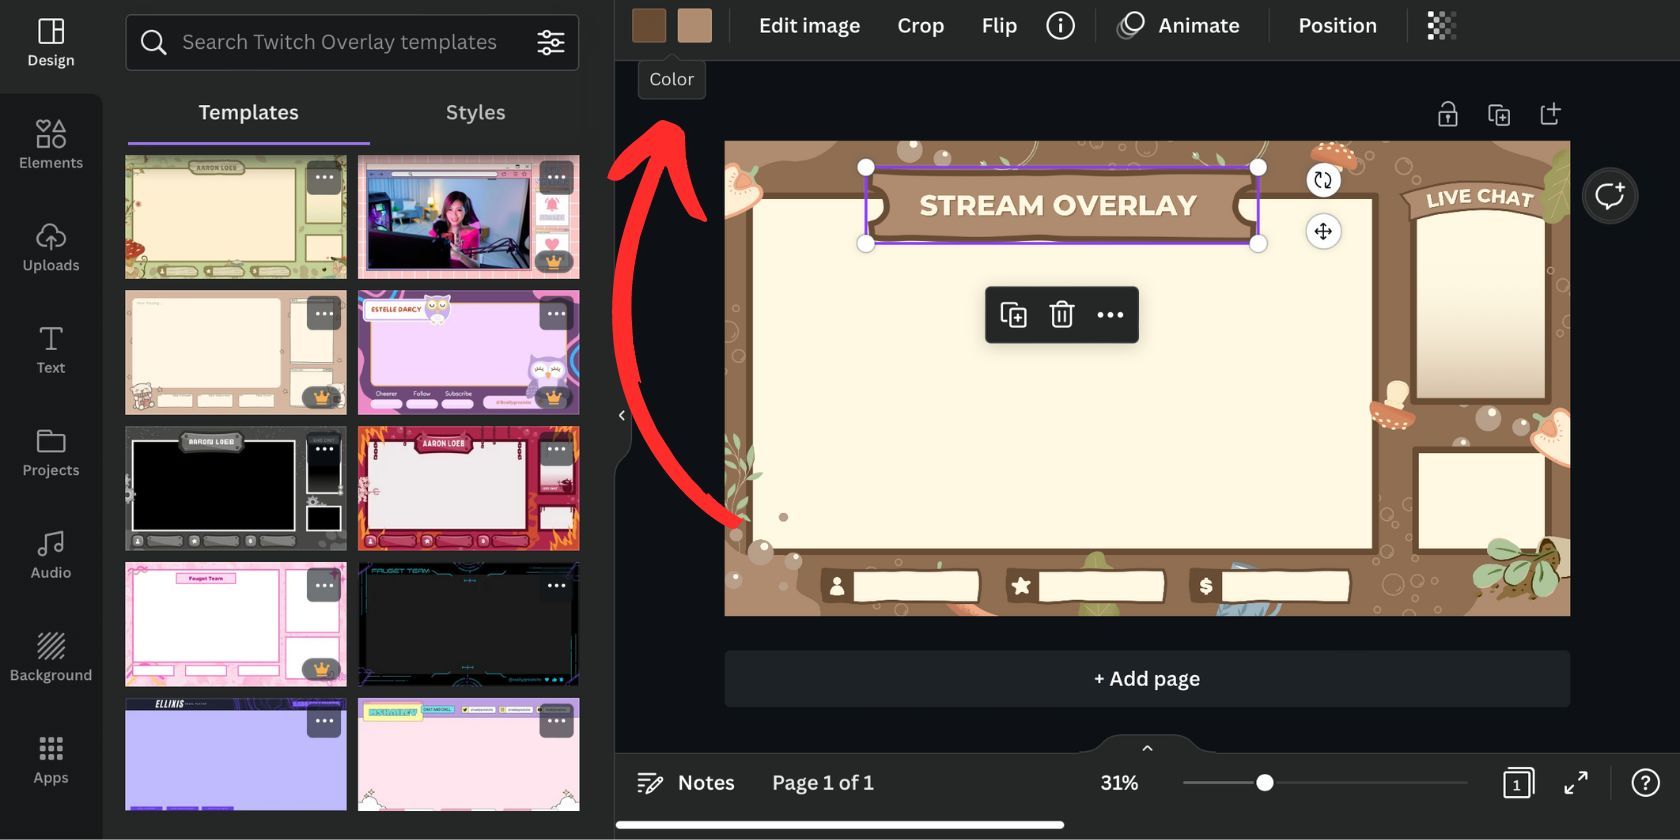 Changing the Colors on a Twitch Overlay in Canva